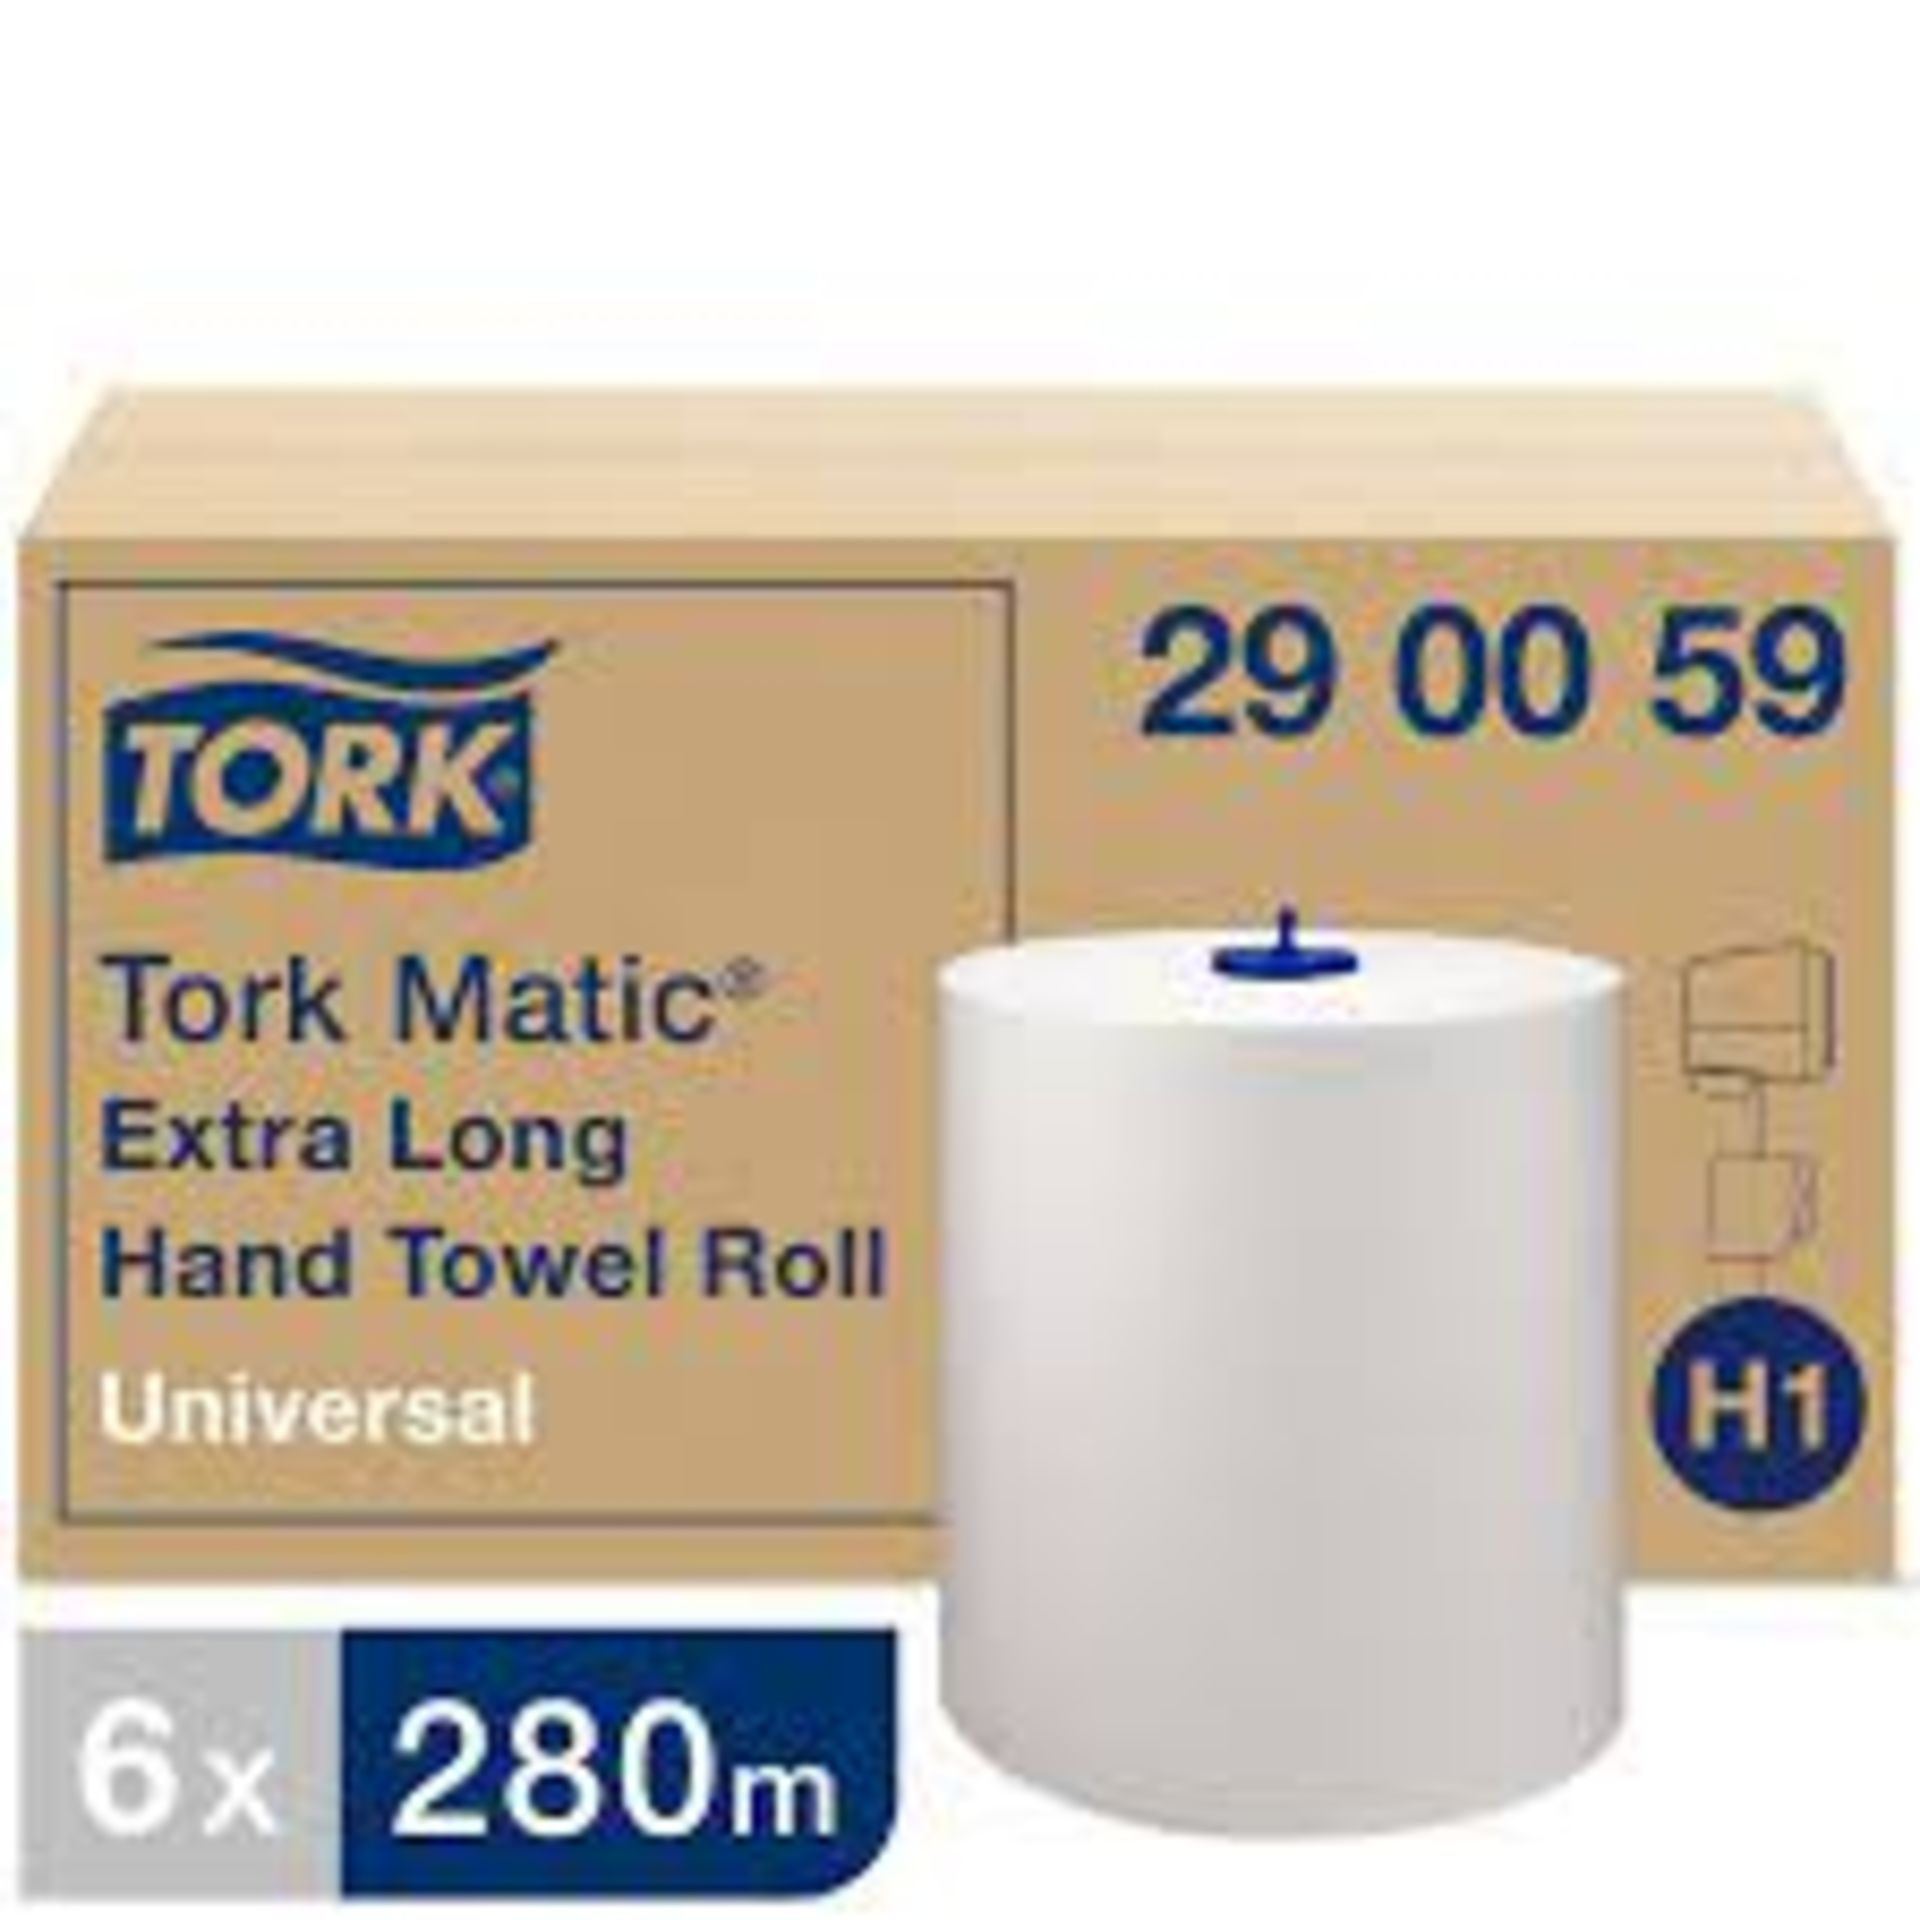 3 X BRAND NEW PACKS OF 6 TORK 290059 MATIC EXTRA LONG PAPER HAND TOWEL ROLLS UNIVERSAL WHITE RRP £